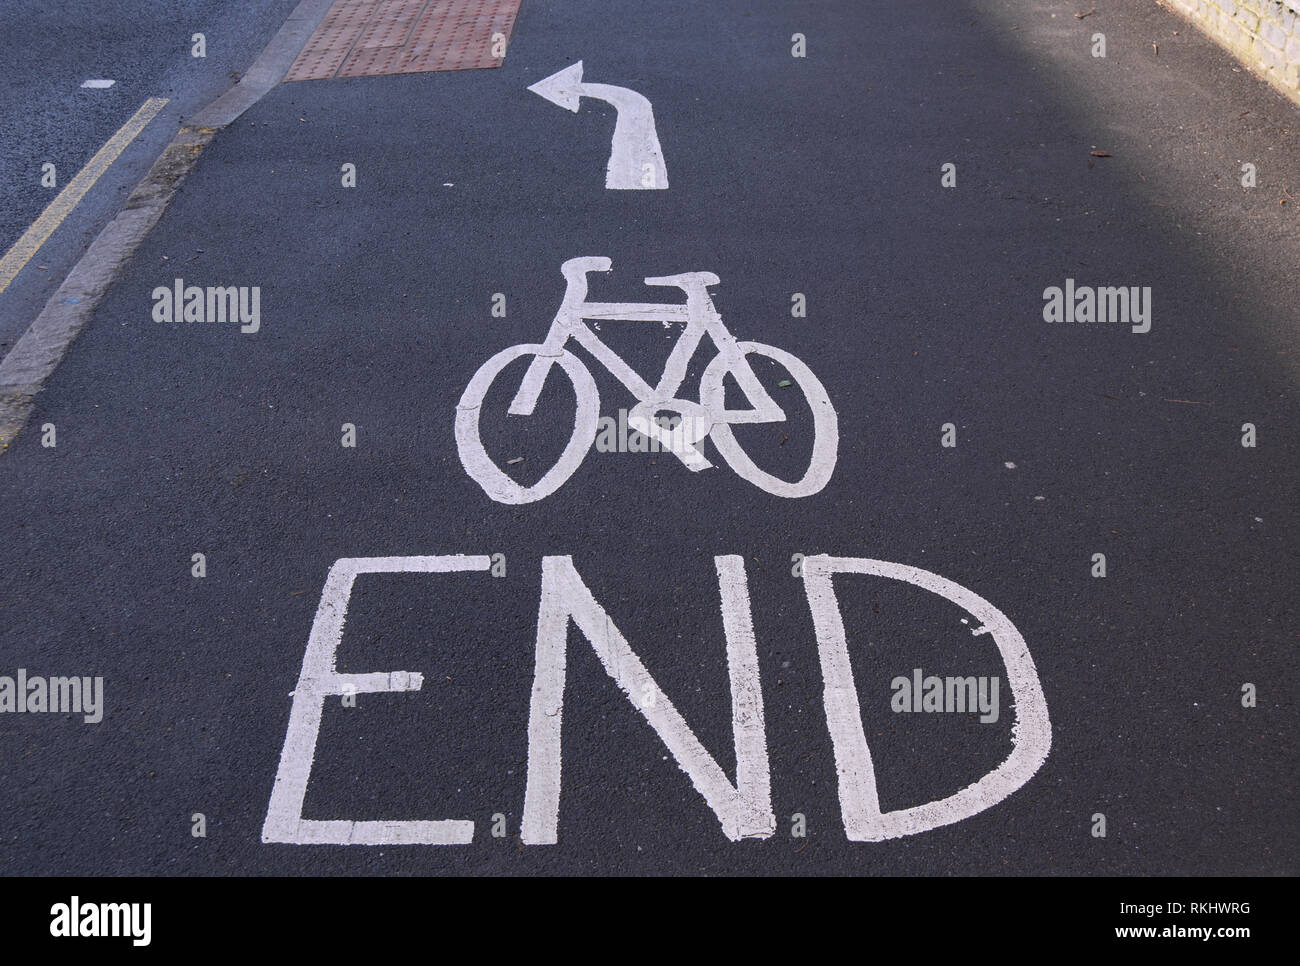 cycle lane markings on portsmouth road, kingston, surrey, england, denoting the end of a cycle lane and that cyclists should turn left Stock Photo